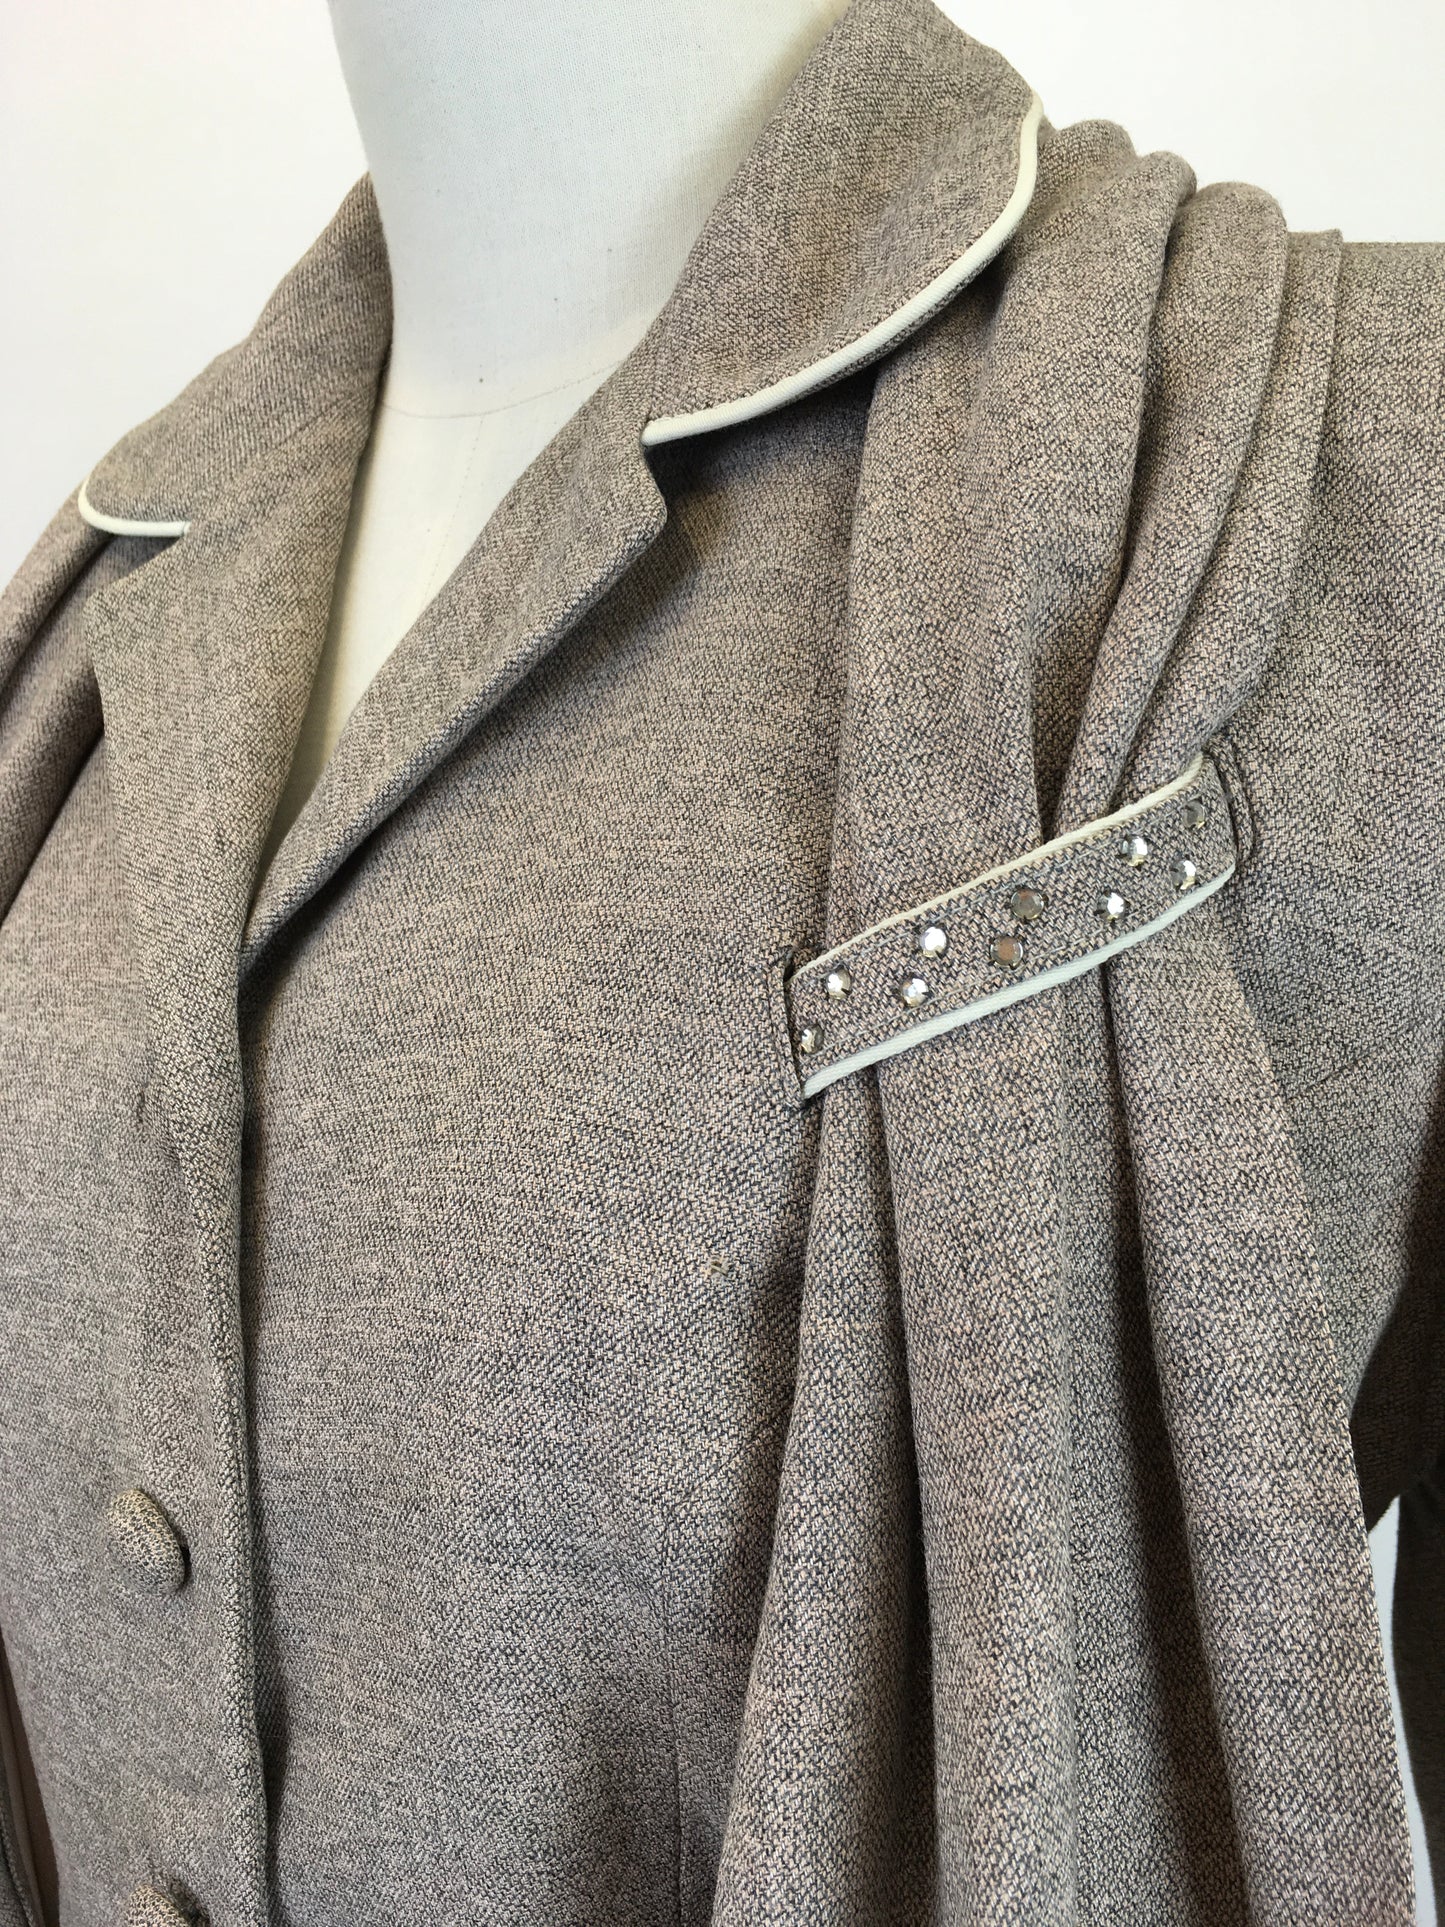 Original 1940's STUNNING 3pc Suit - In Soft Fawn with A Draped Tasselled Scarf